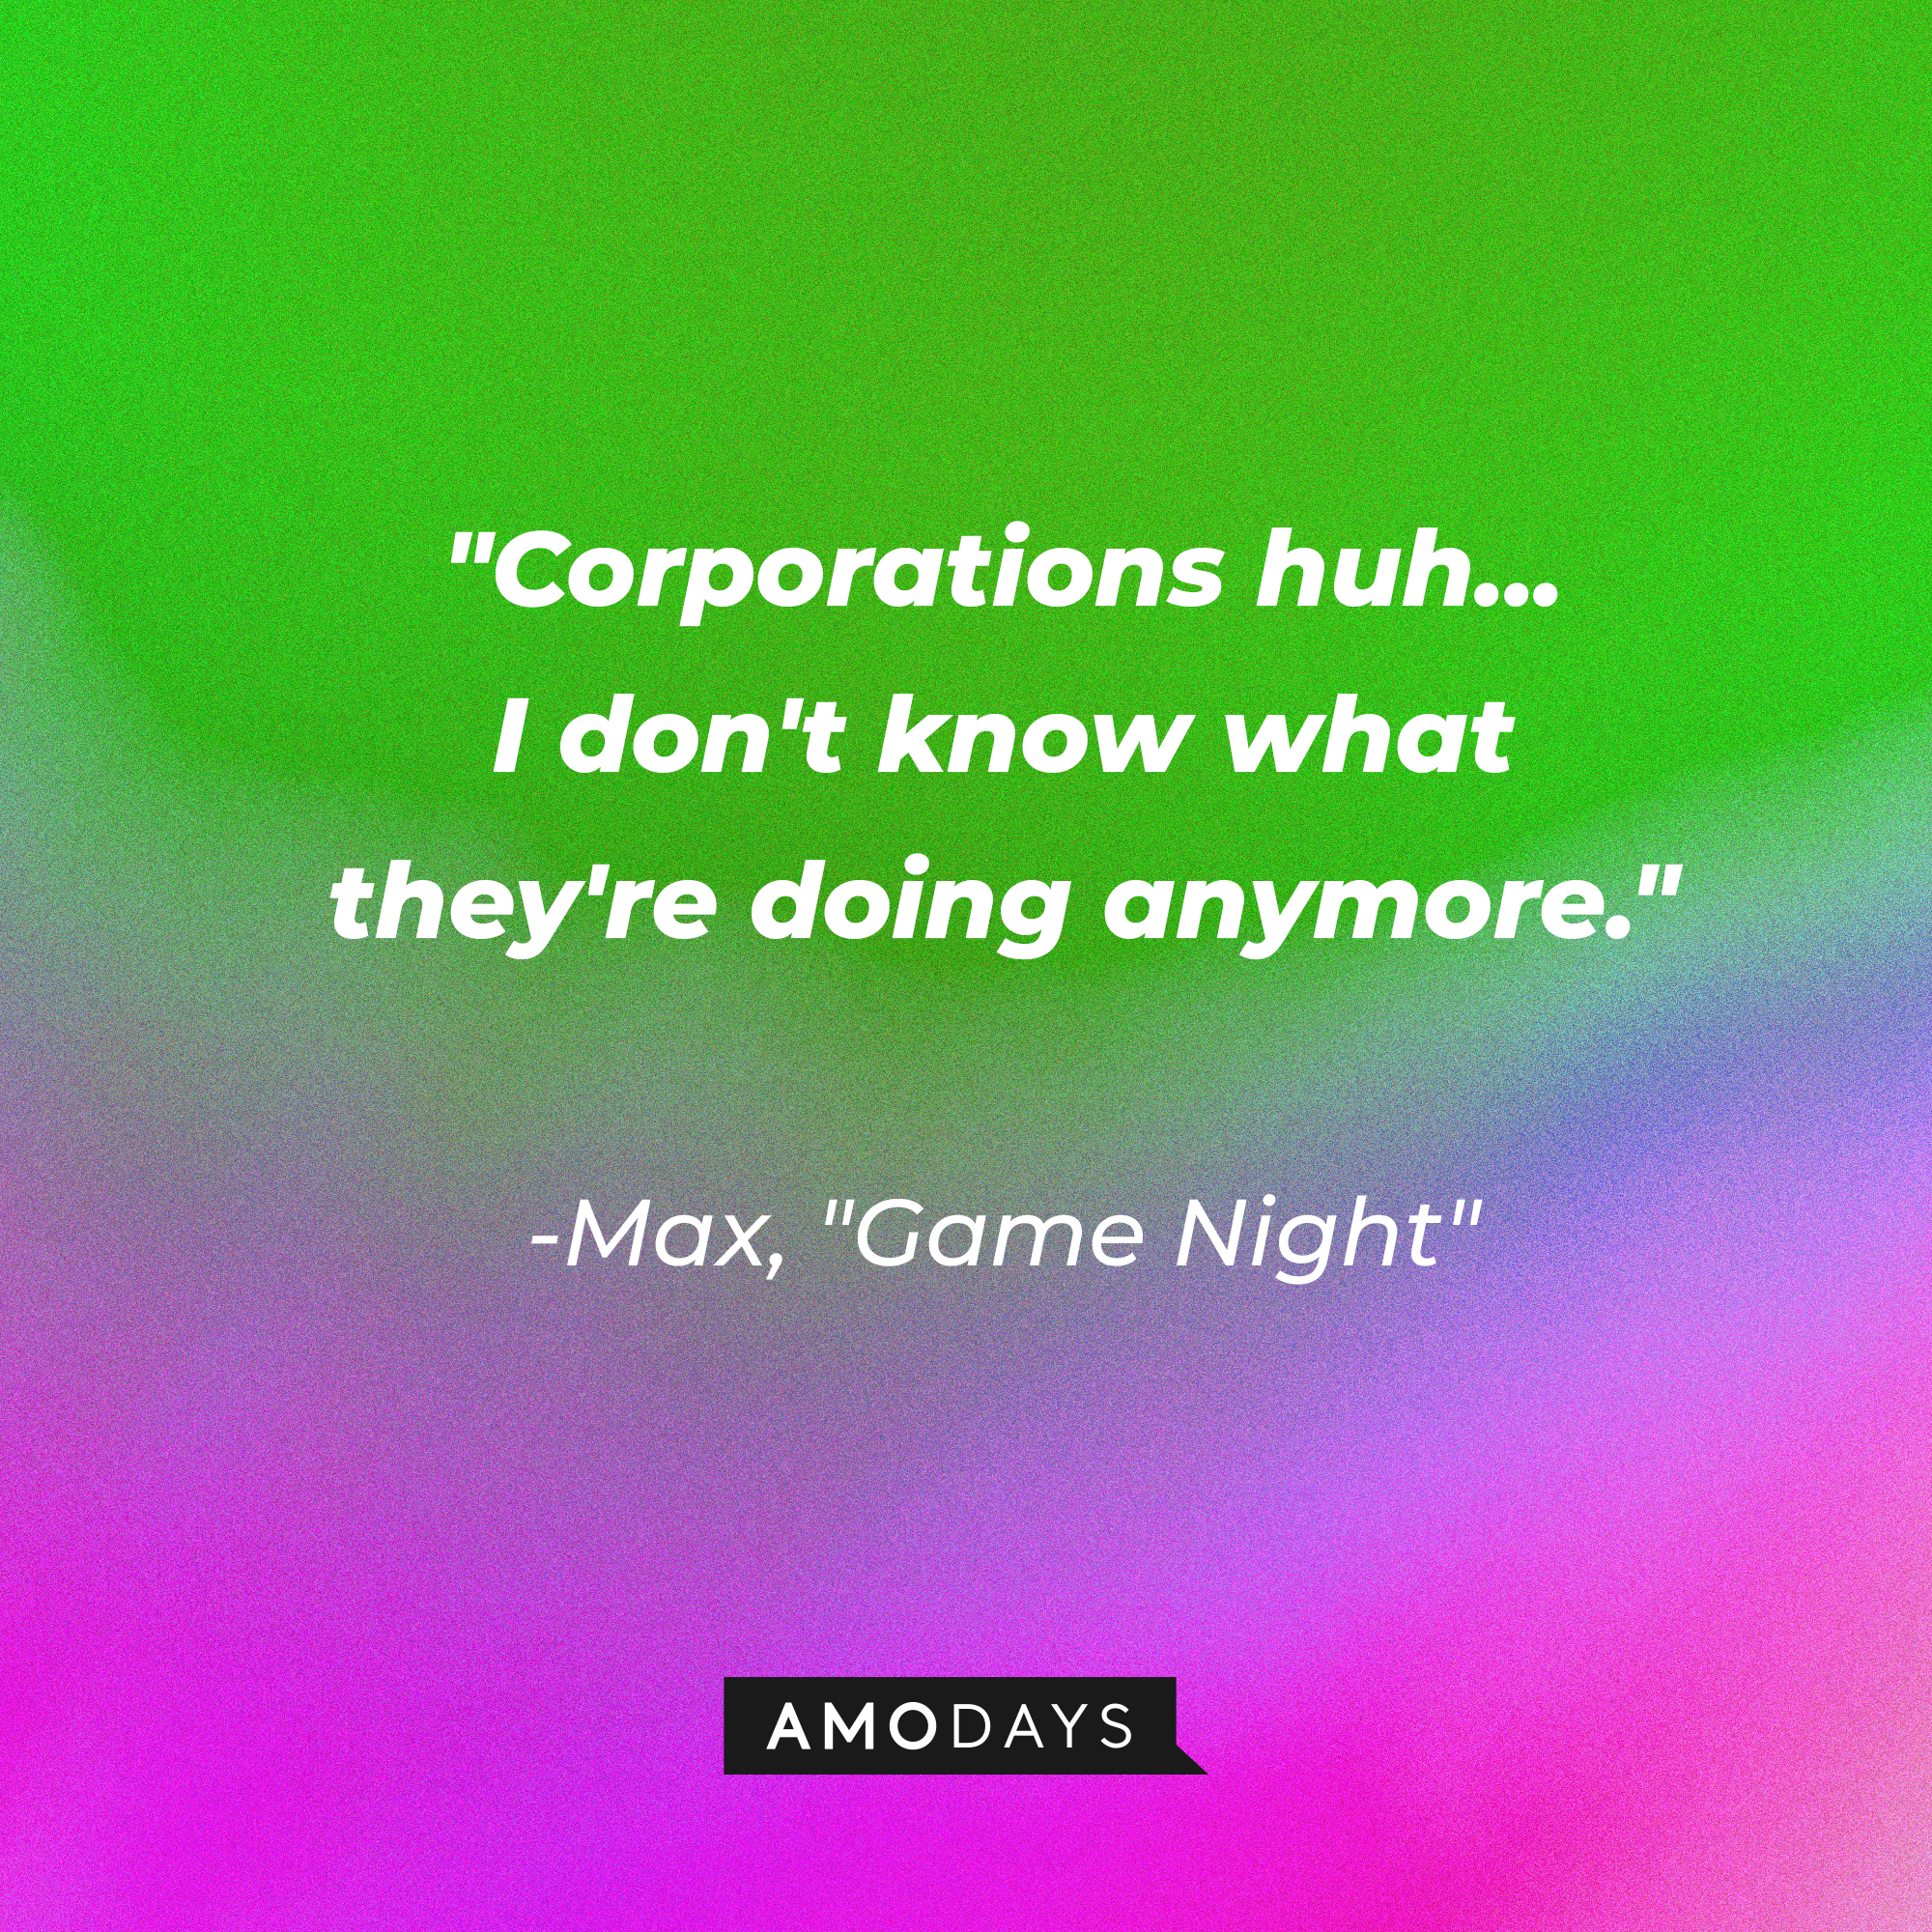 Max's quote from “Game Night”: “Corporations huh... I don't know what they're doing anymore.” | Source: AmoDays